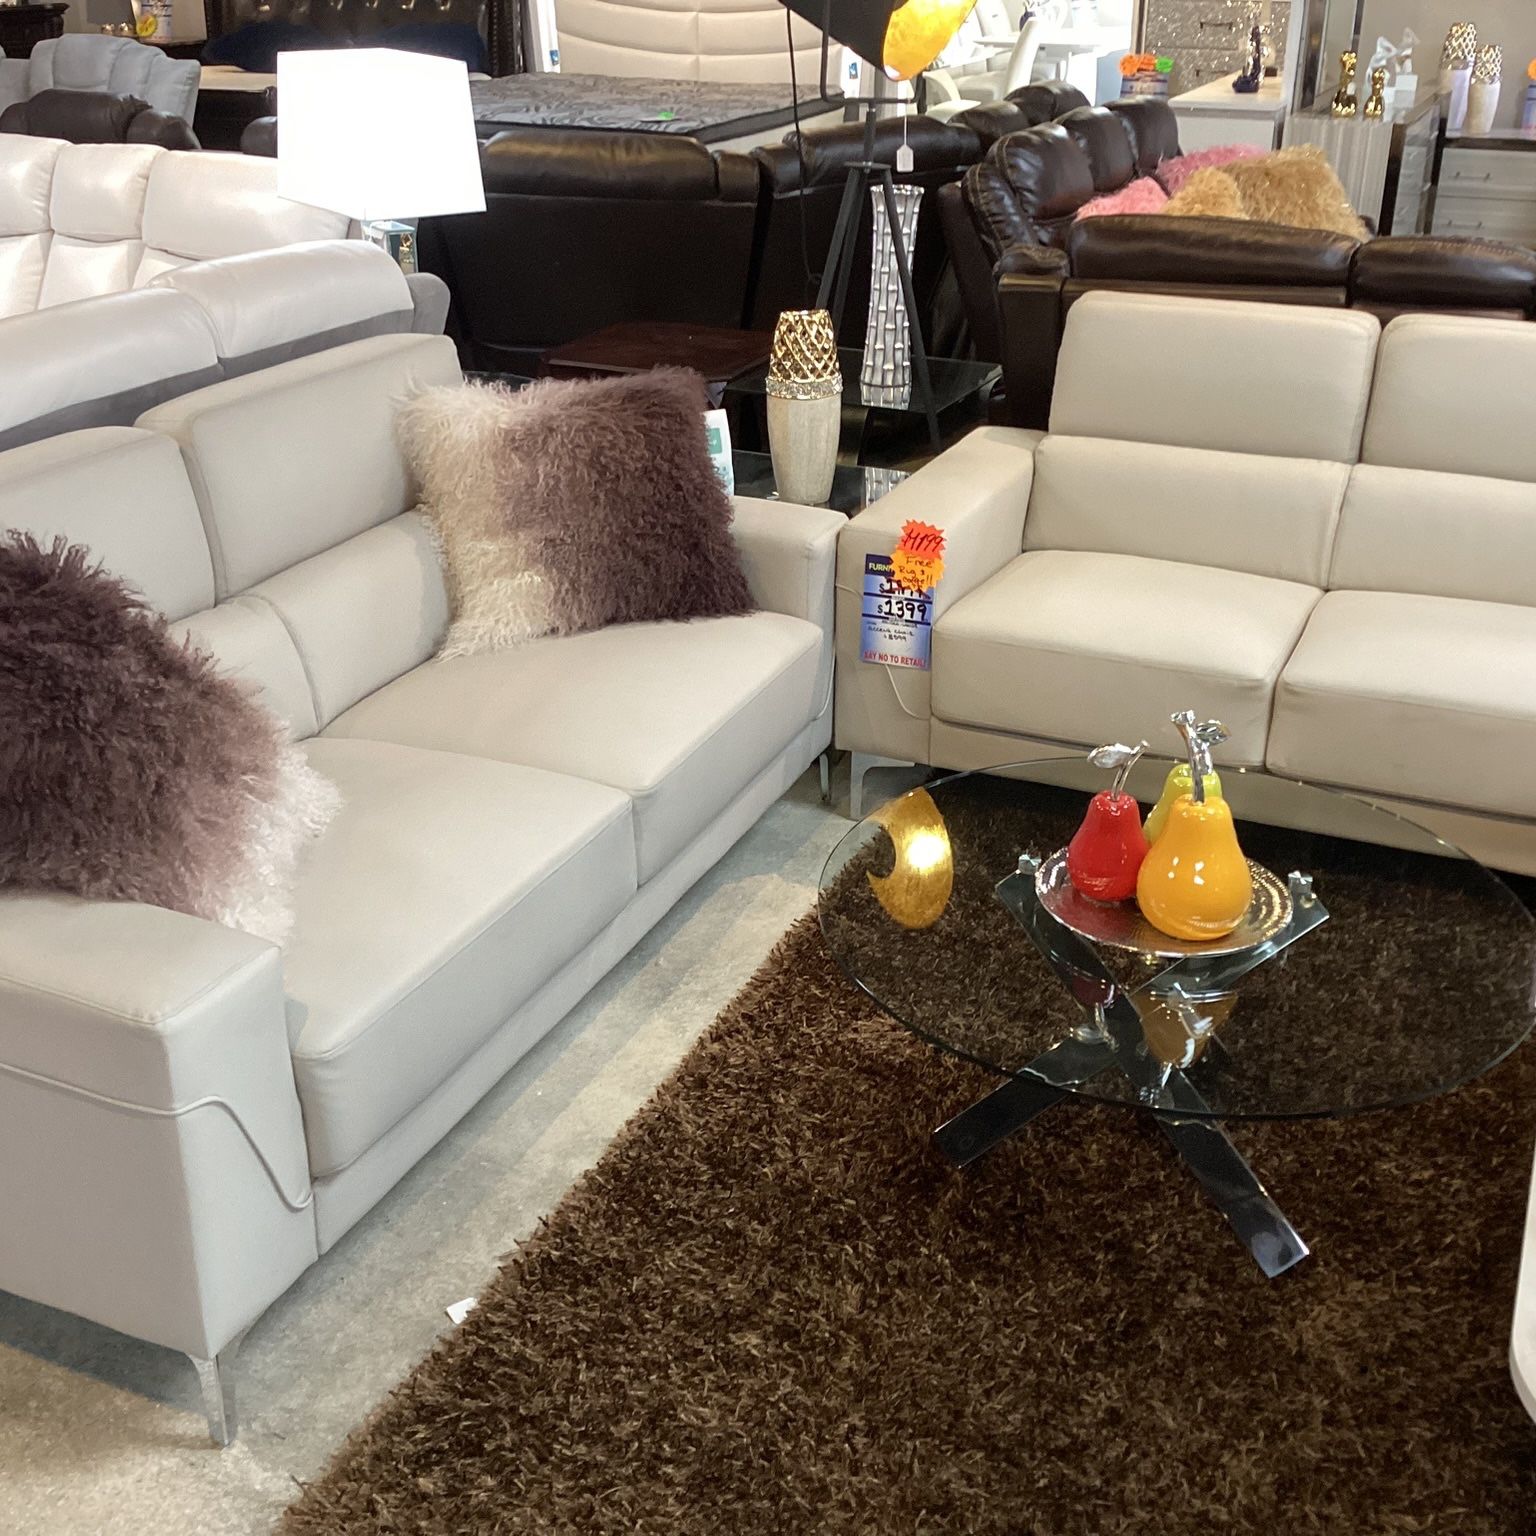 Beautiful Furniture Sofa Loveseat On Sale Now With A Free Hug And A Free Coffee Table For $1199 Colors White/Gray/Black/Red Are Available 